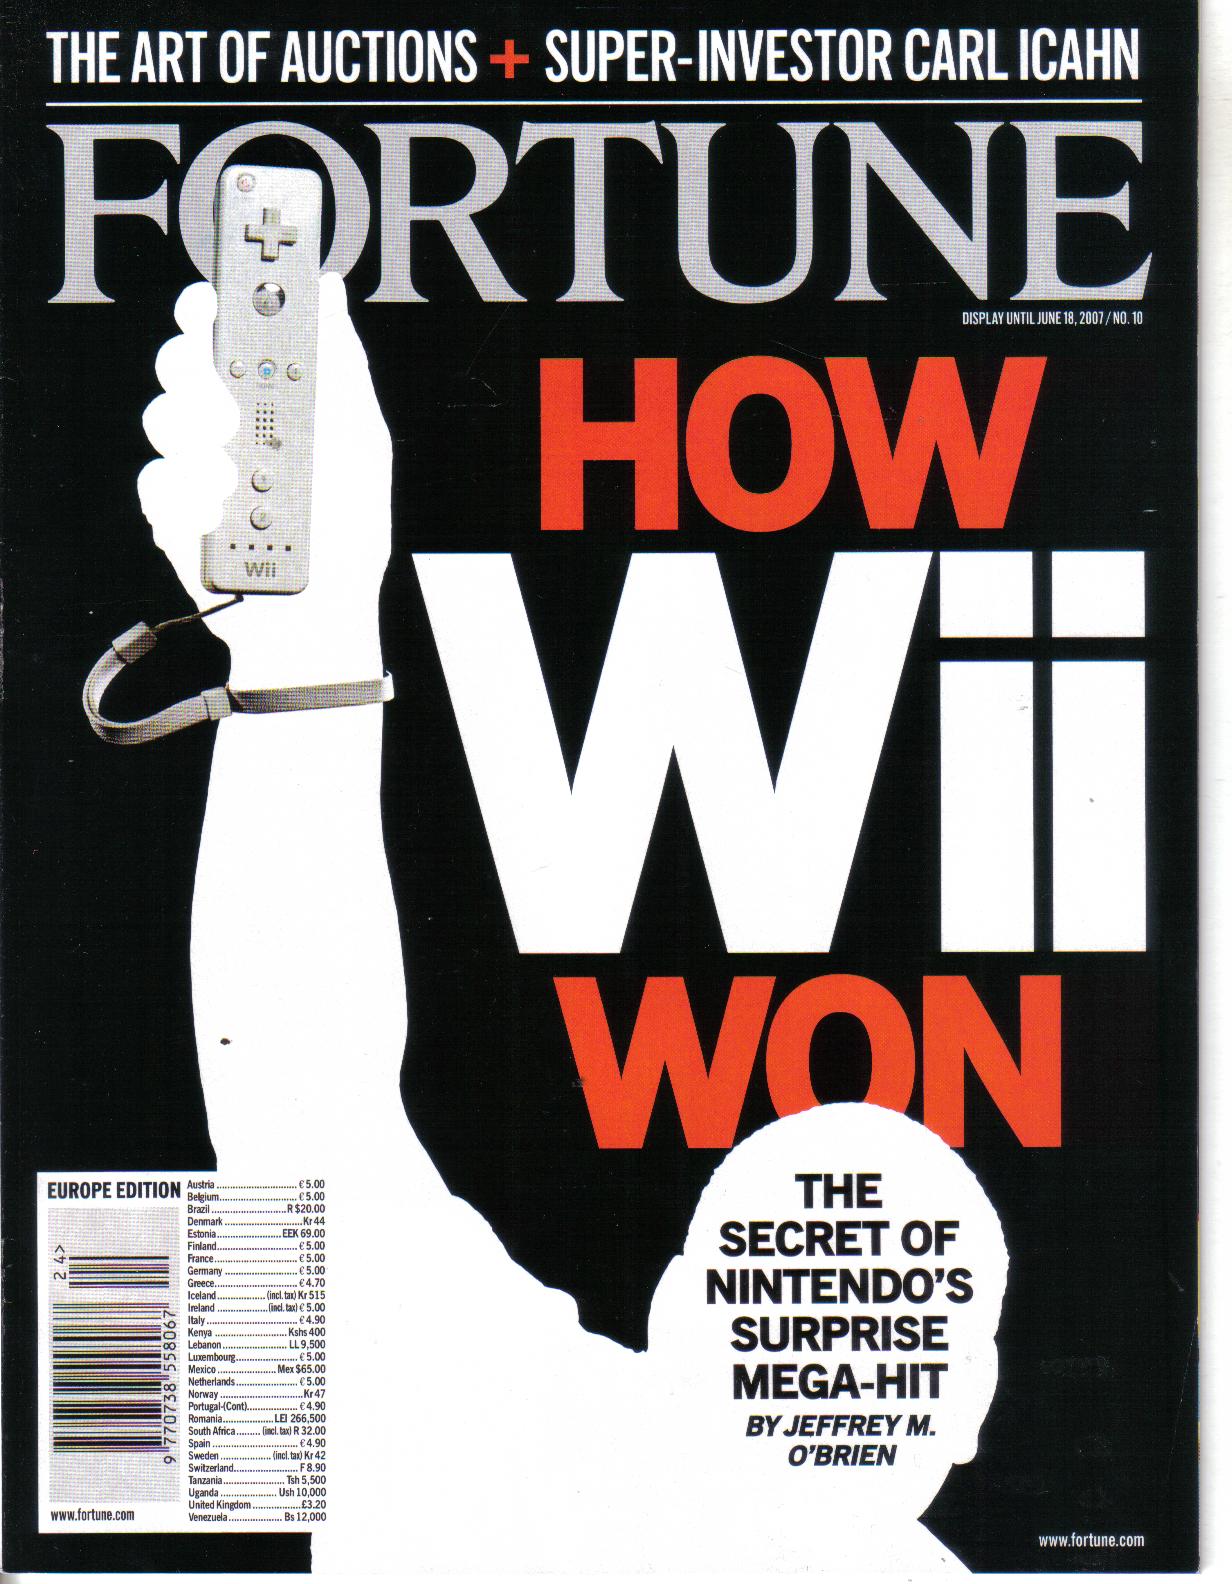 FORTUNE HOW WII WON    june 2007